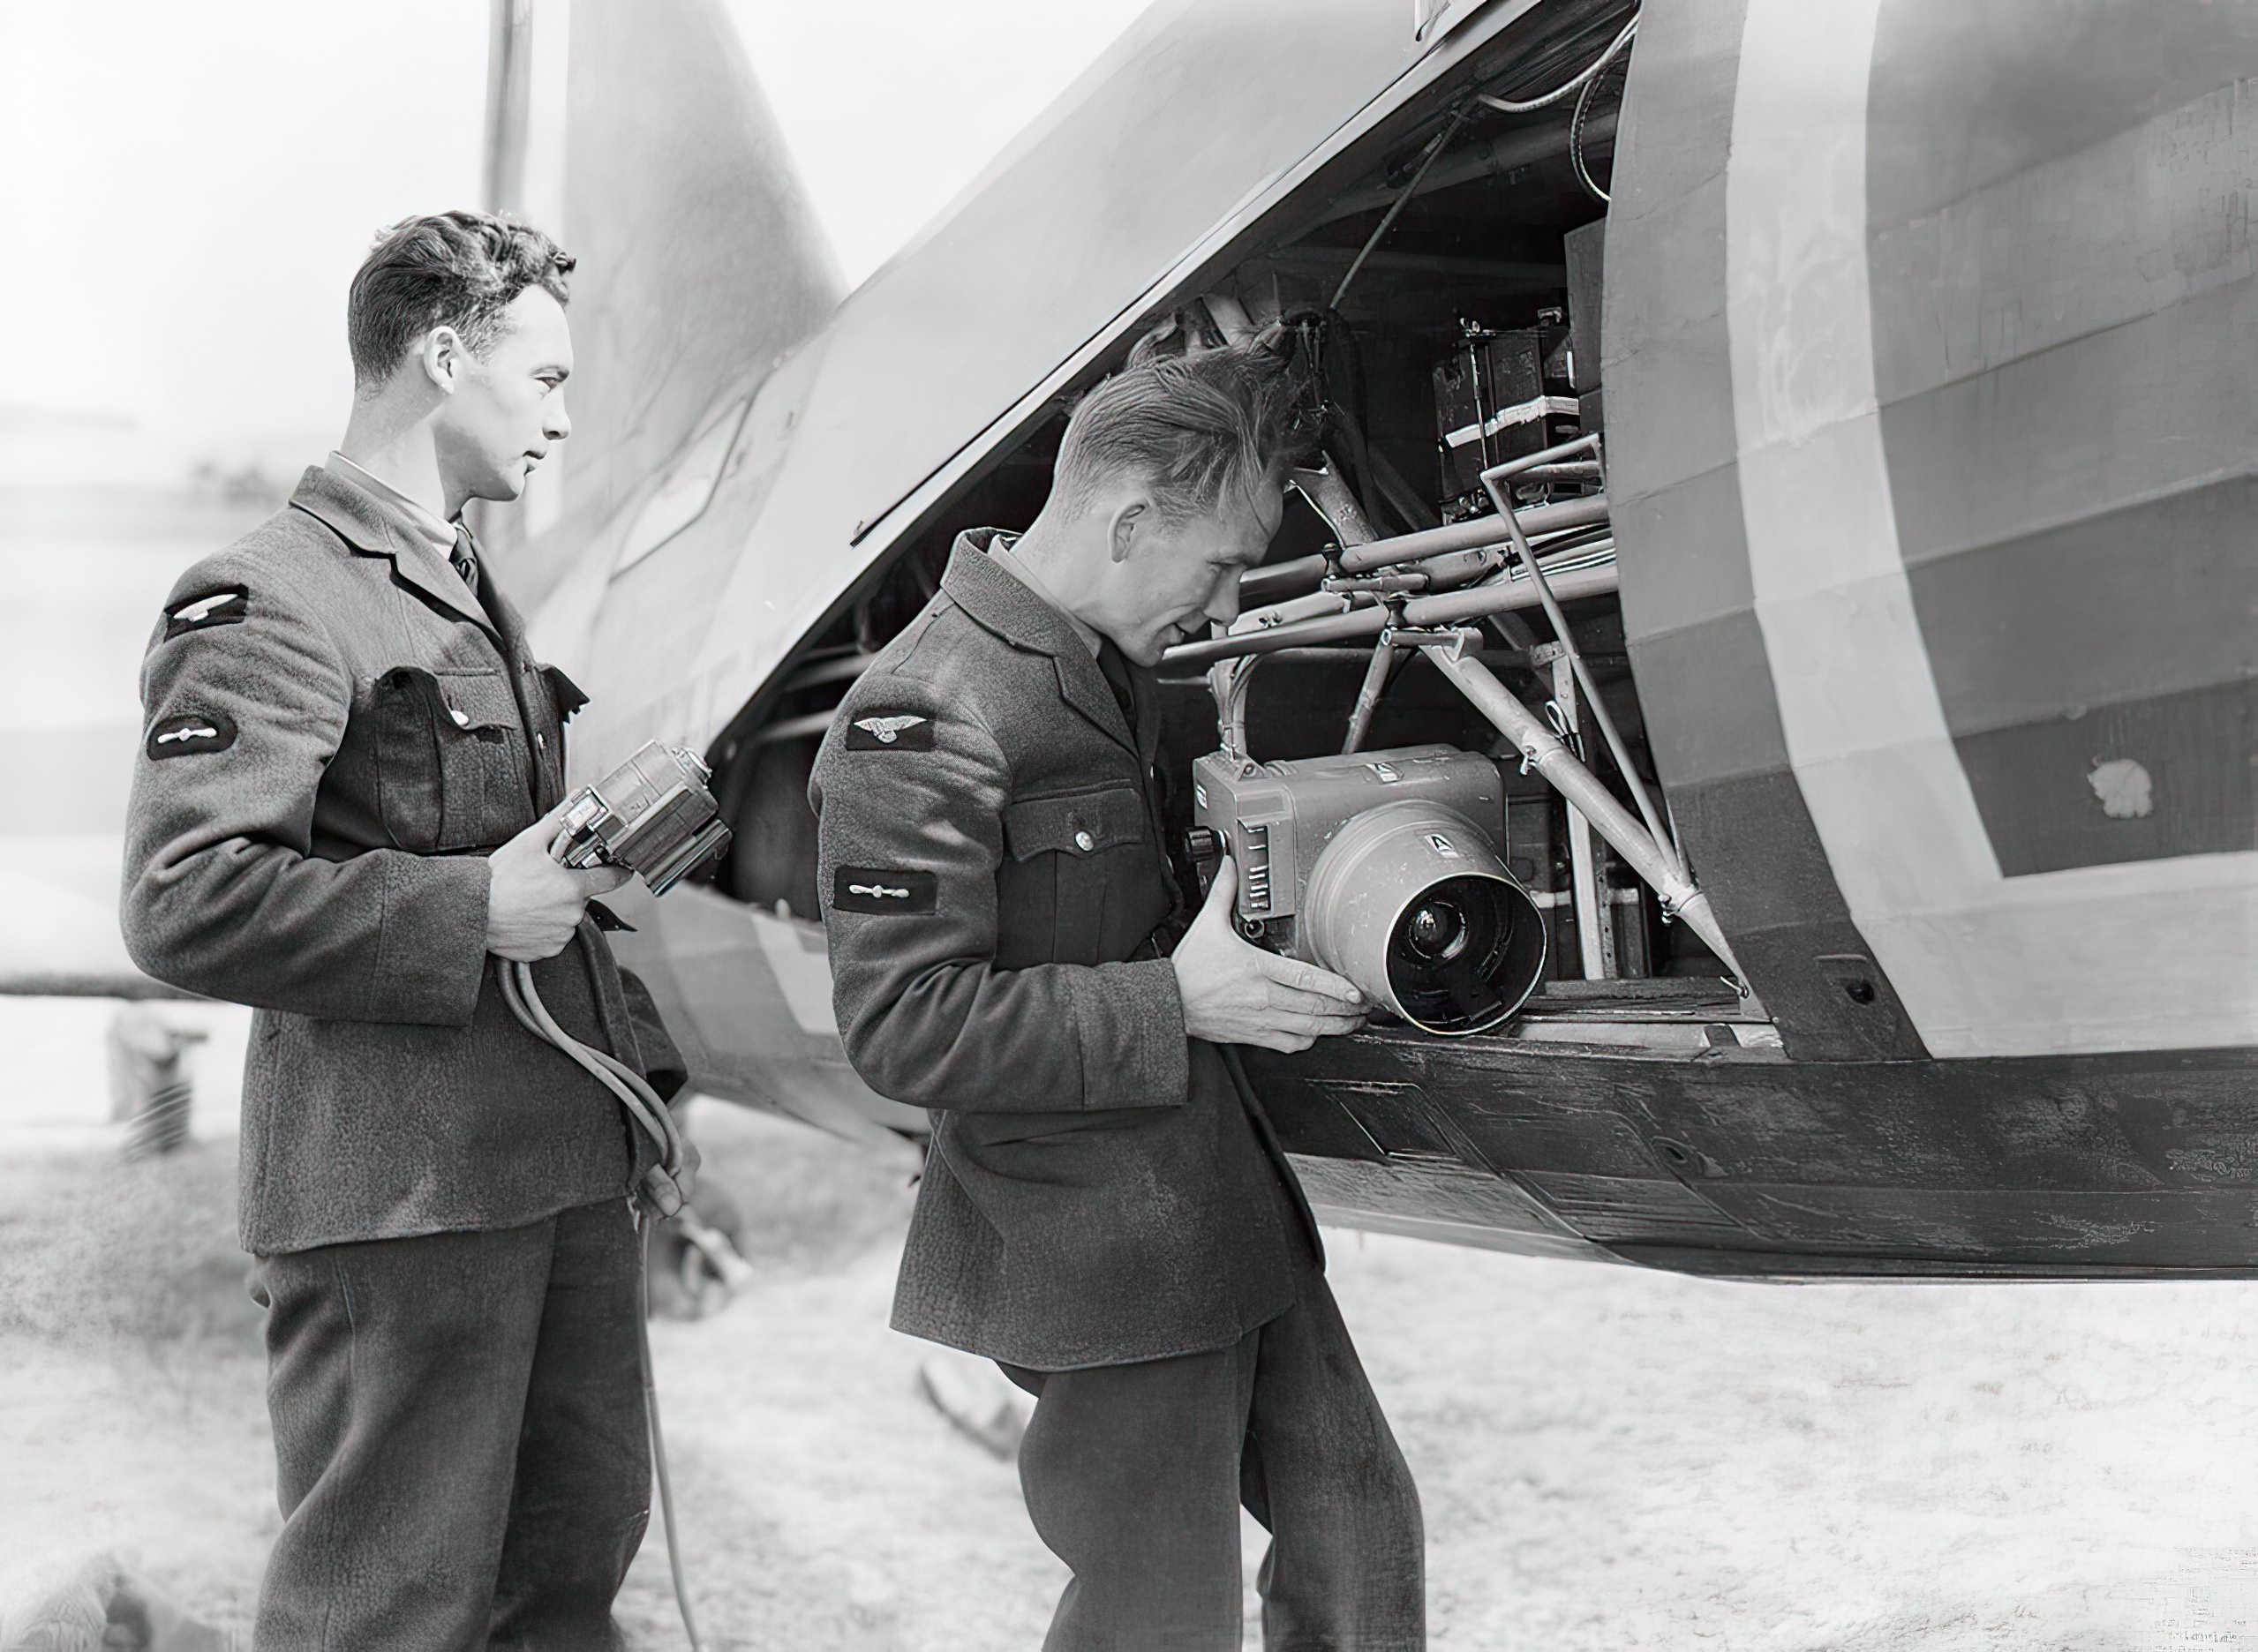 Groundcrew installing camera equipment into a Westland Lysander Mark II of No. 225 Squadron at RAF Tilshead, Wiltshire. The airman on the right loads a Type F.24 aerial camera into its position in the aircraft, while the airman on the left holds the camera motor unit